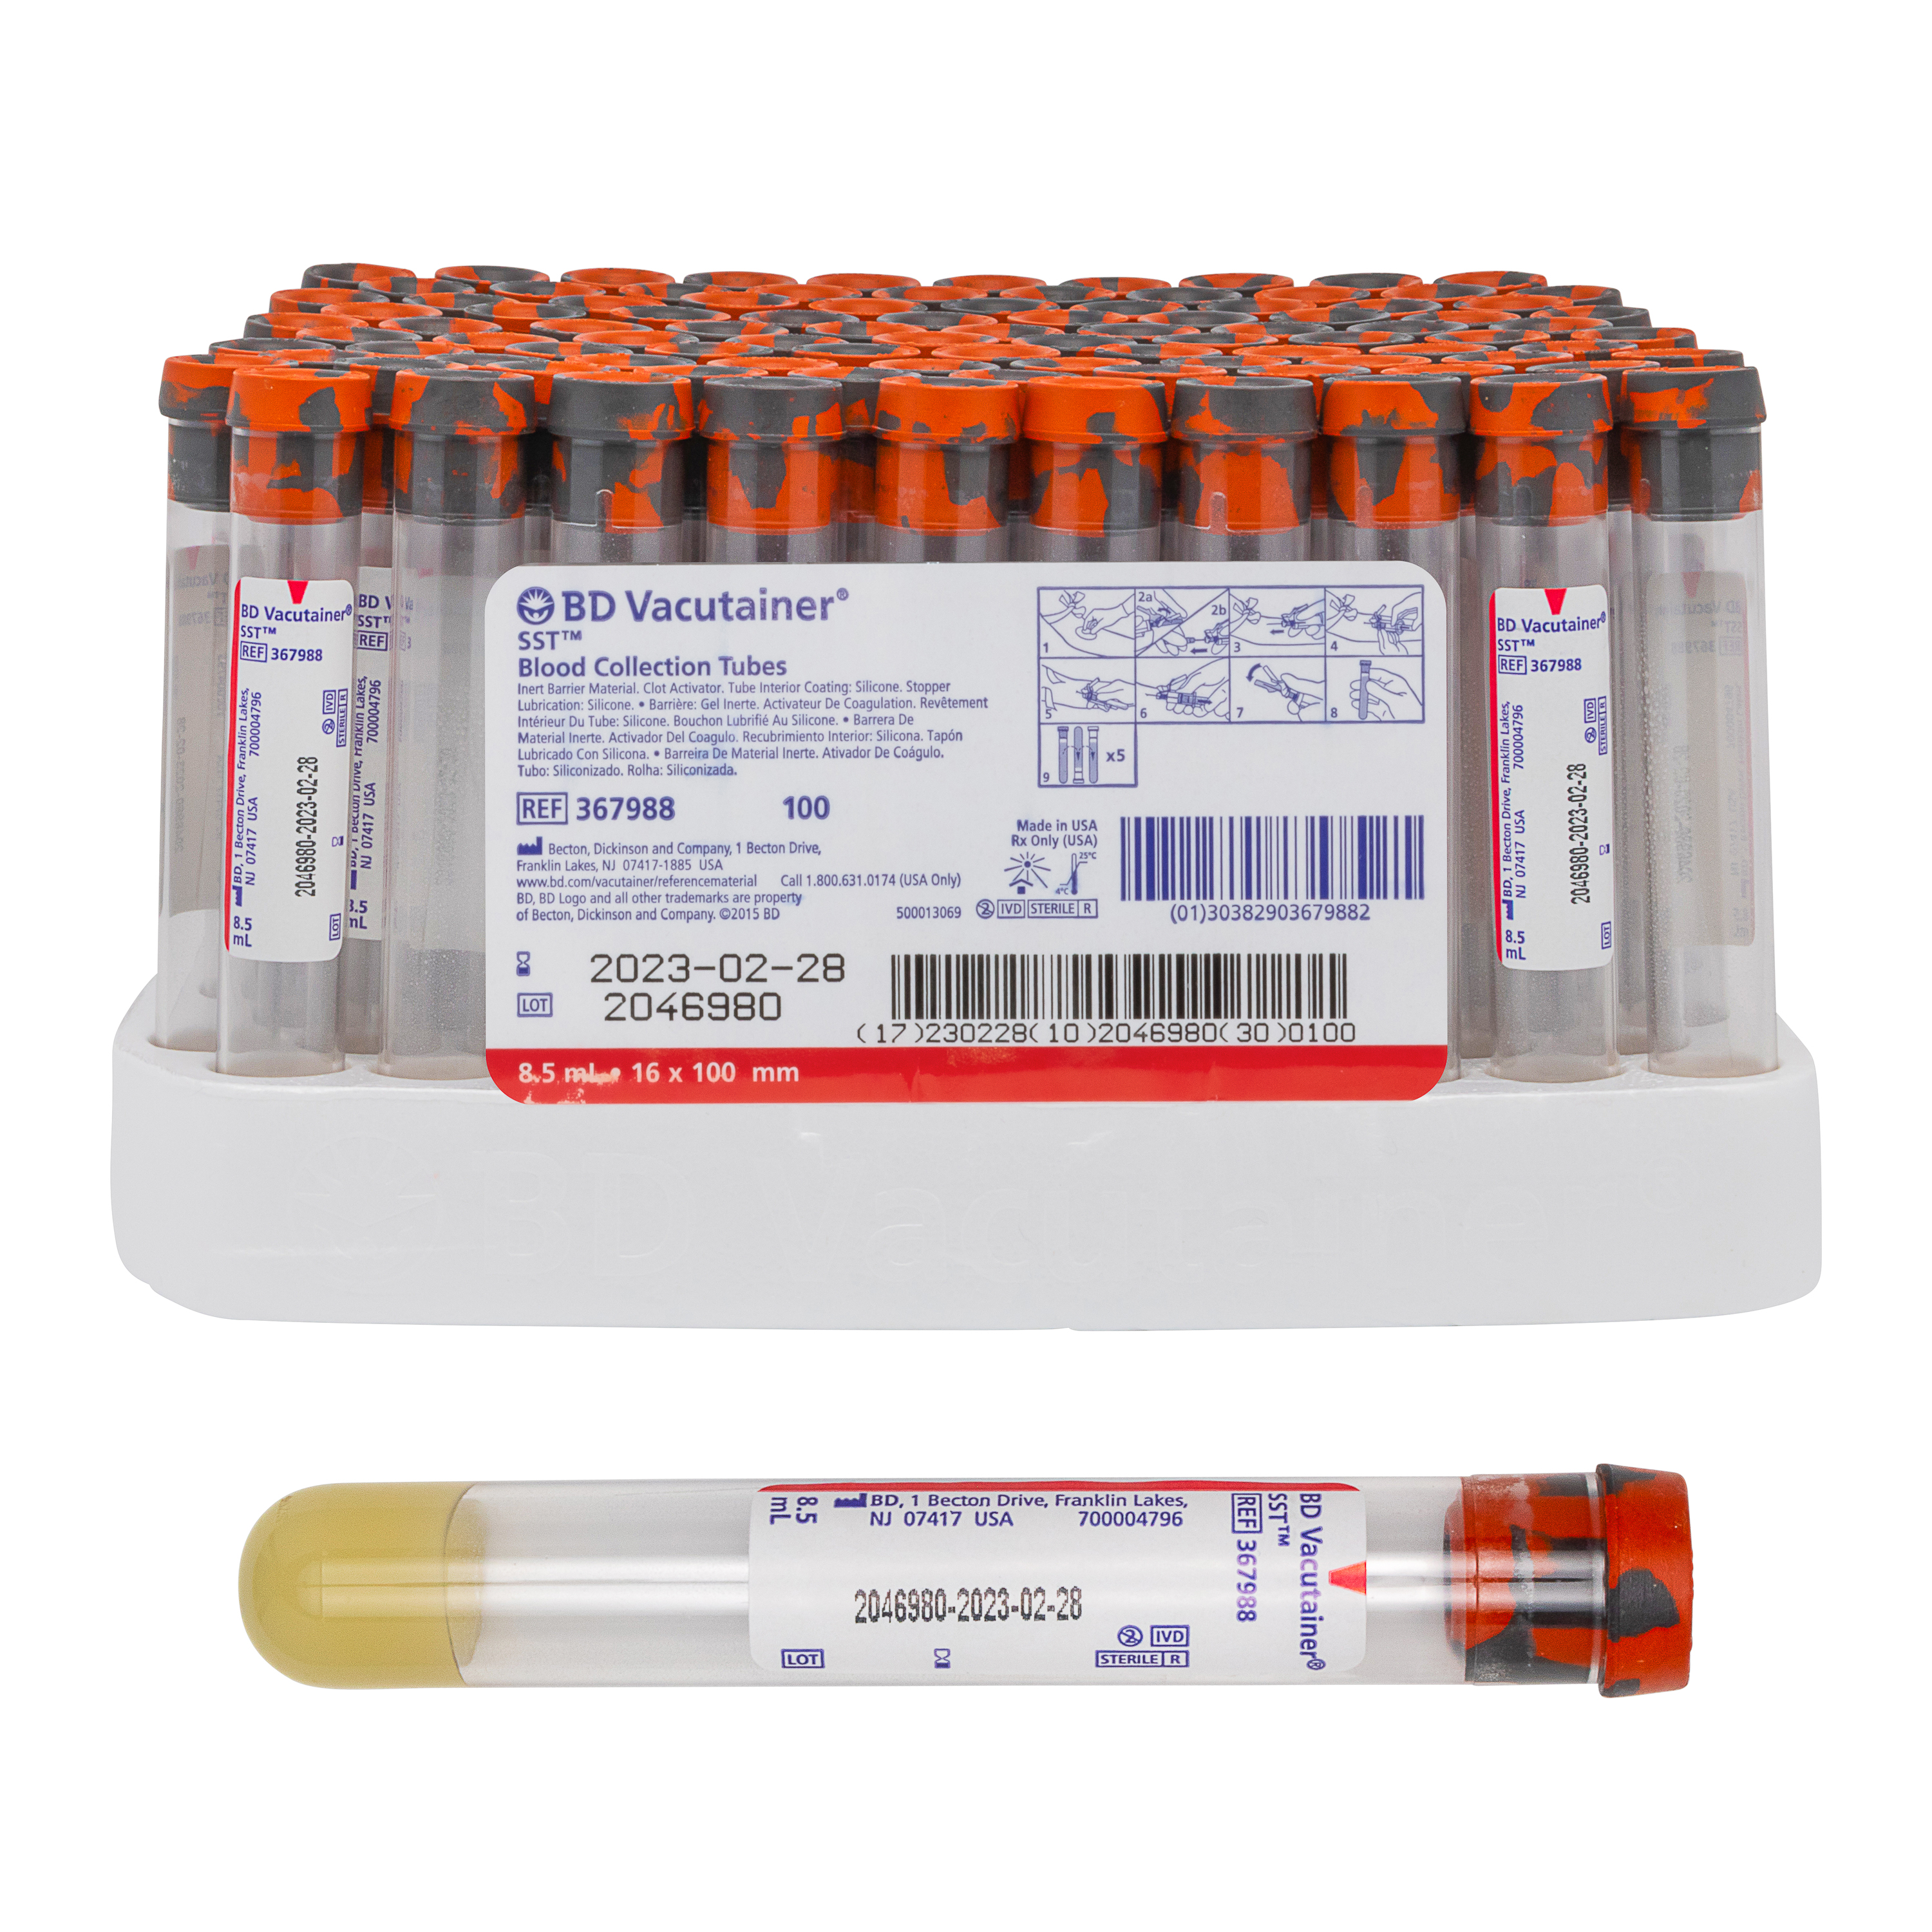 Vacutainer SST Tubes 16 x 100 mm 8.5mL Conventional Paper Label